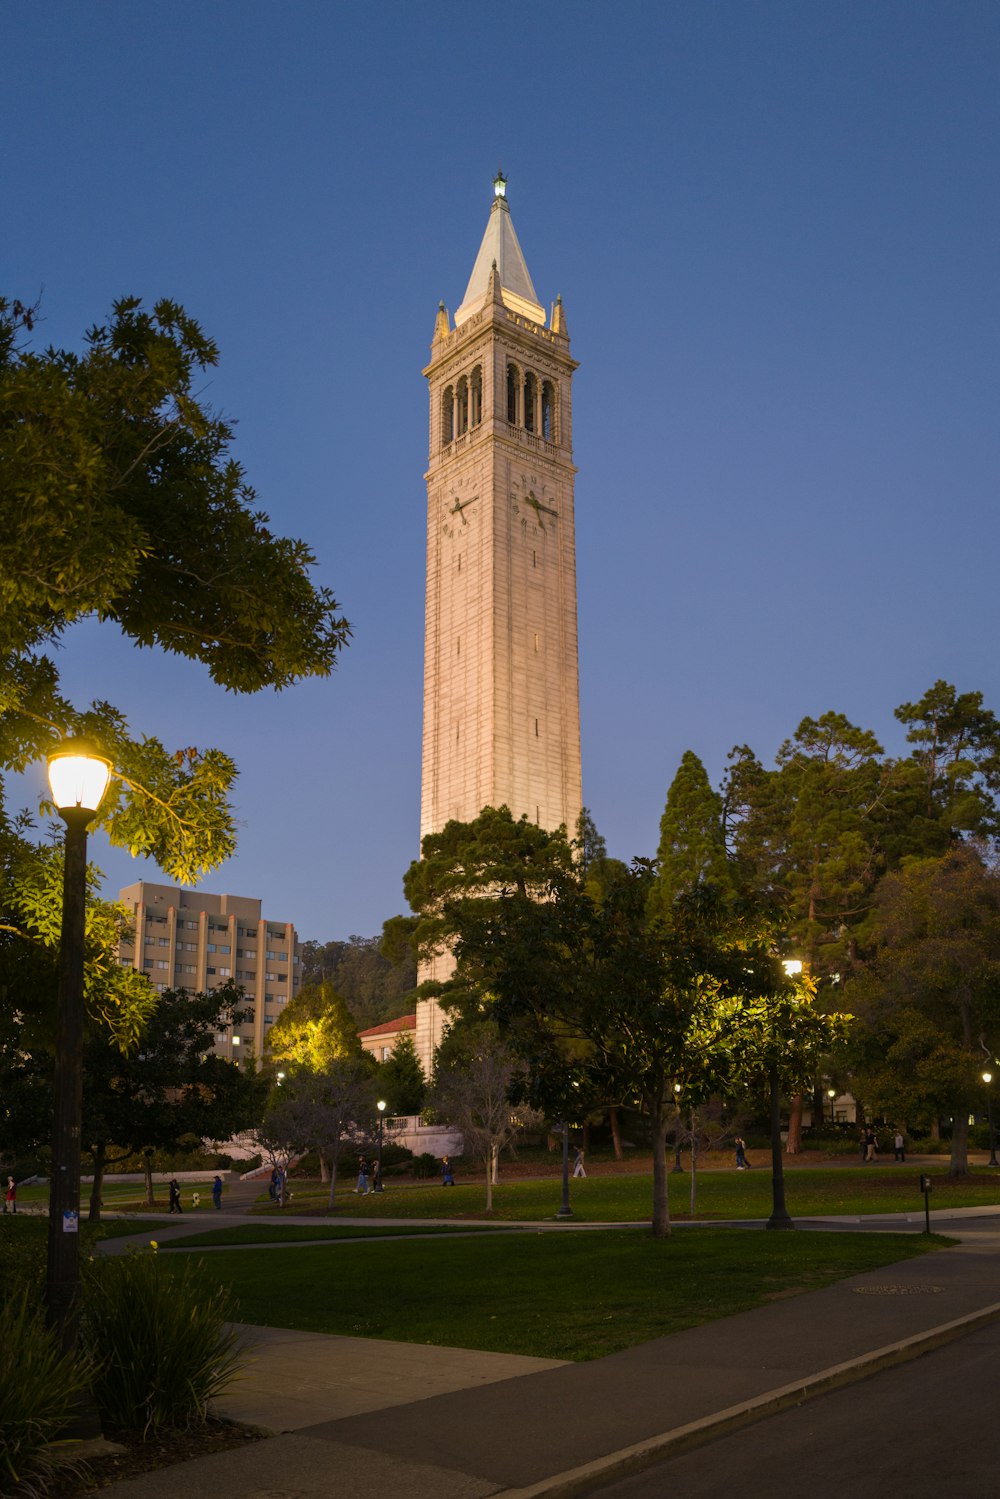 a tall clock tower towering over a lush green park